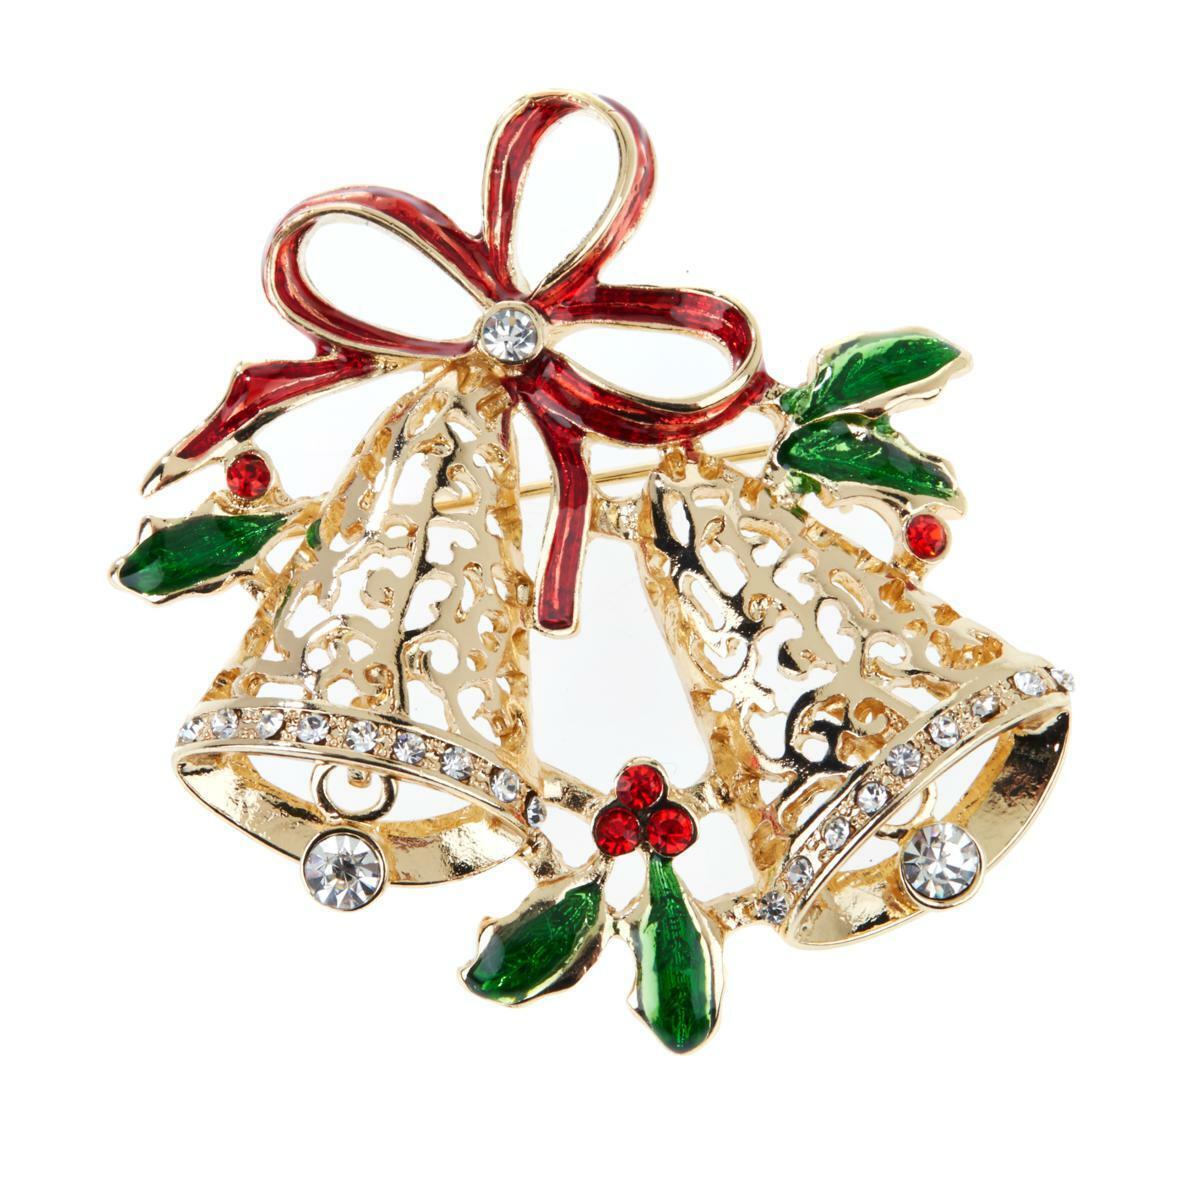 R.J. Graziano "Get Gifty" Crystal Accented and Enamel Brooch Bells HSN $40 | Brooch